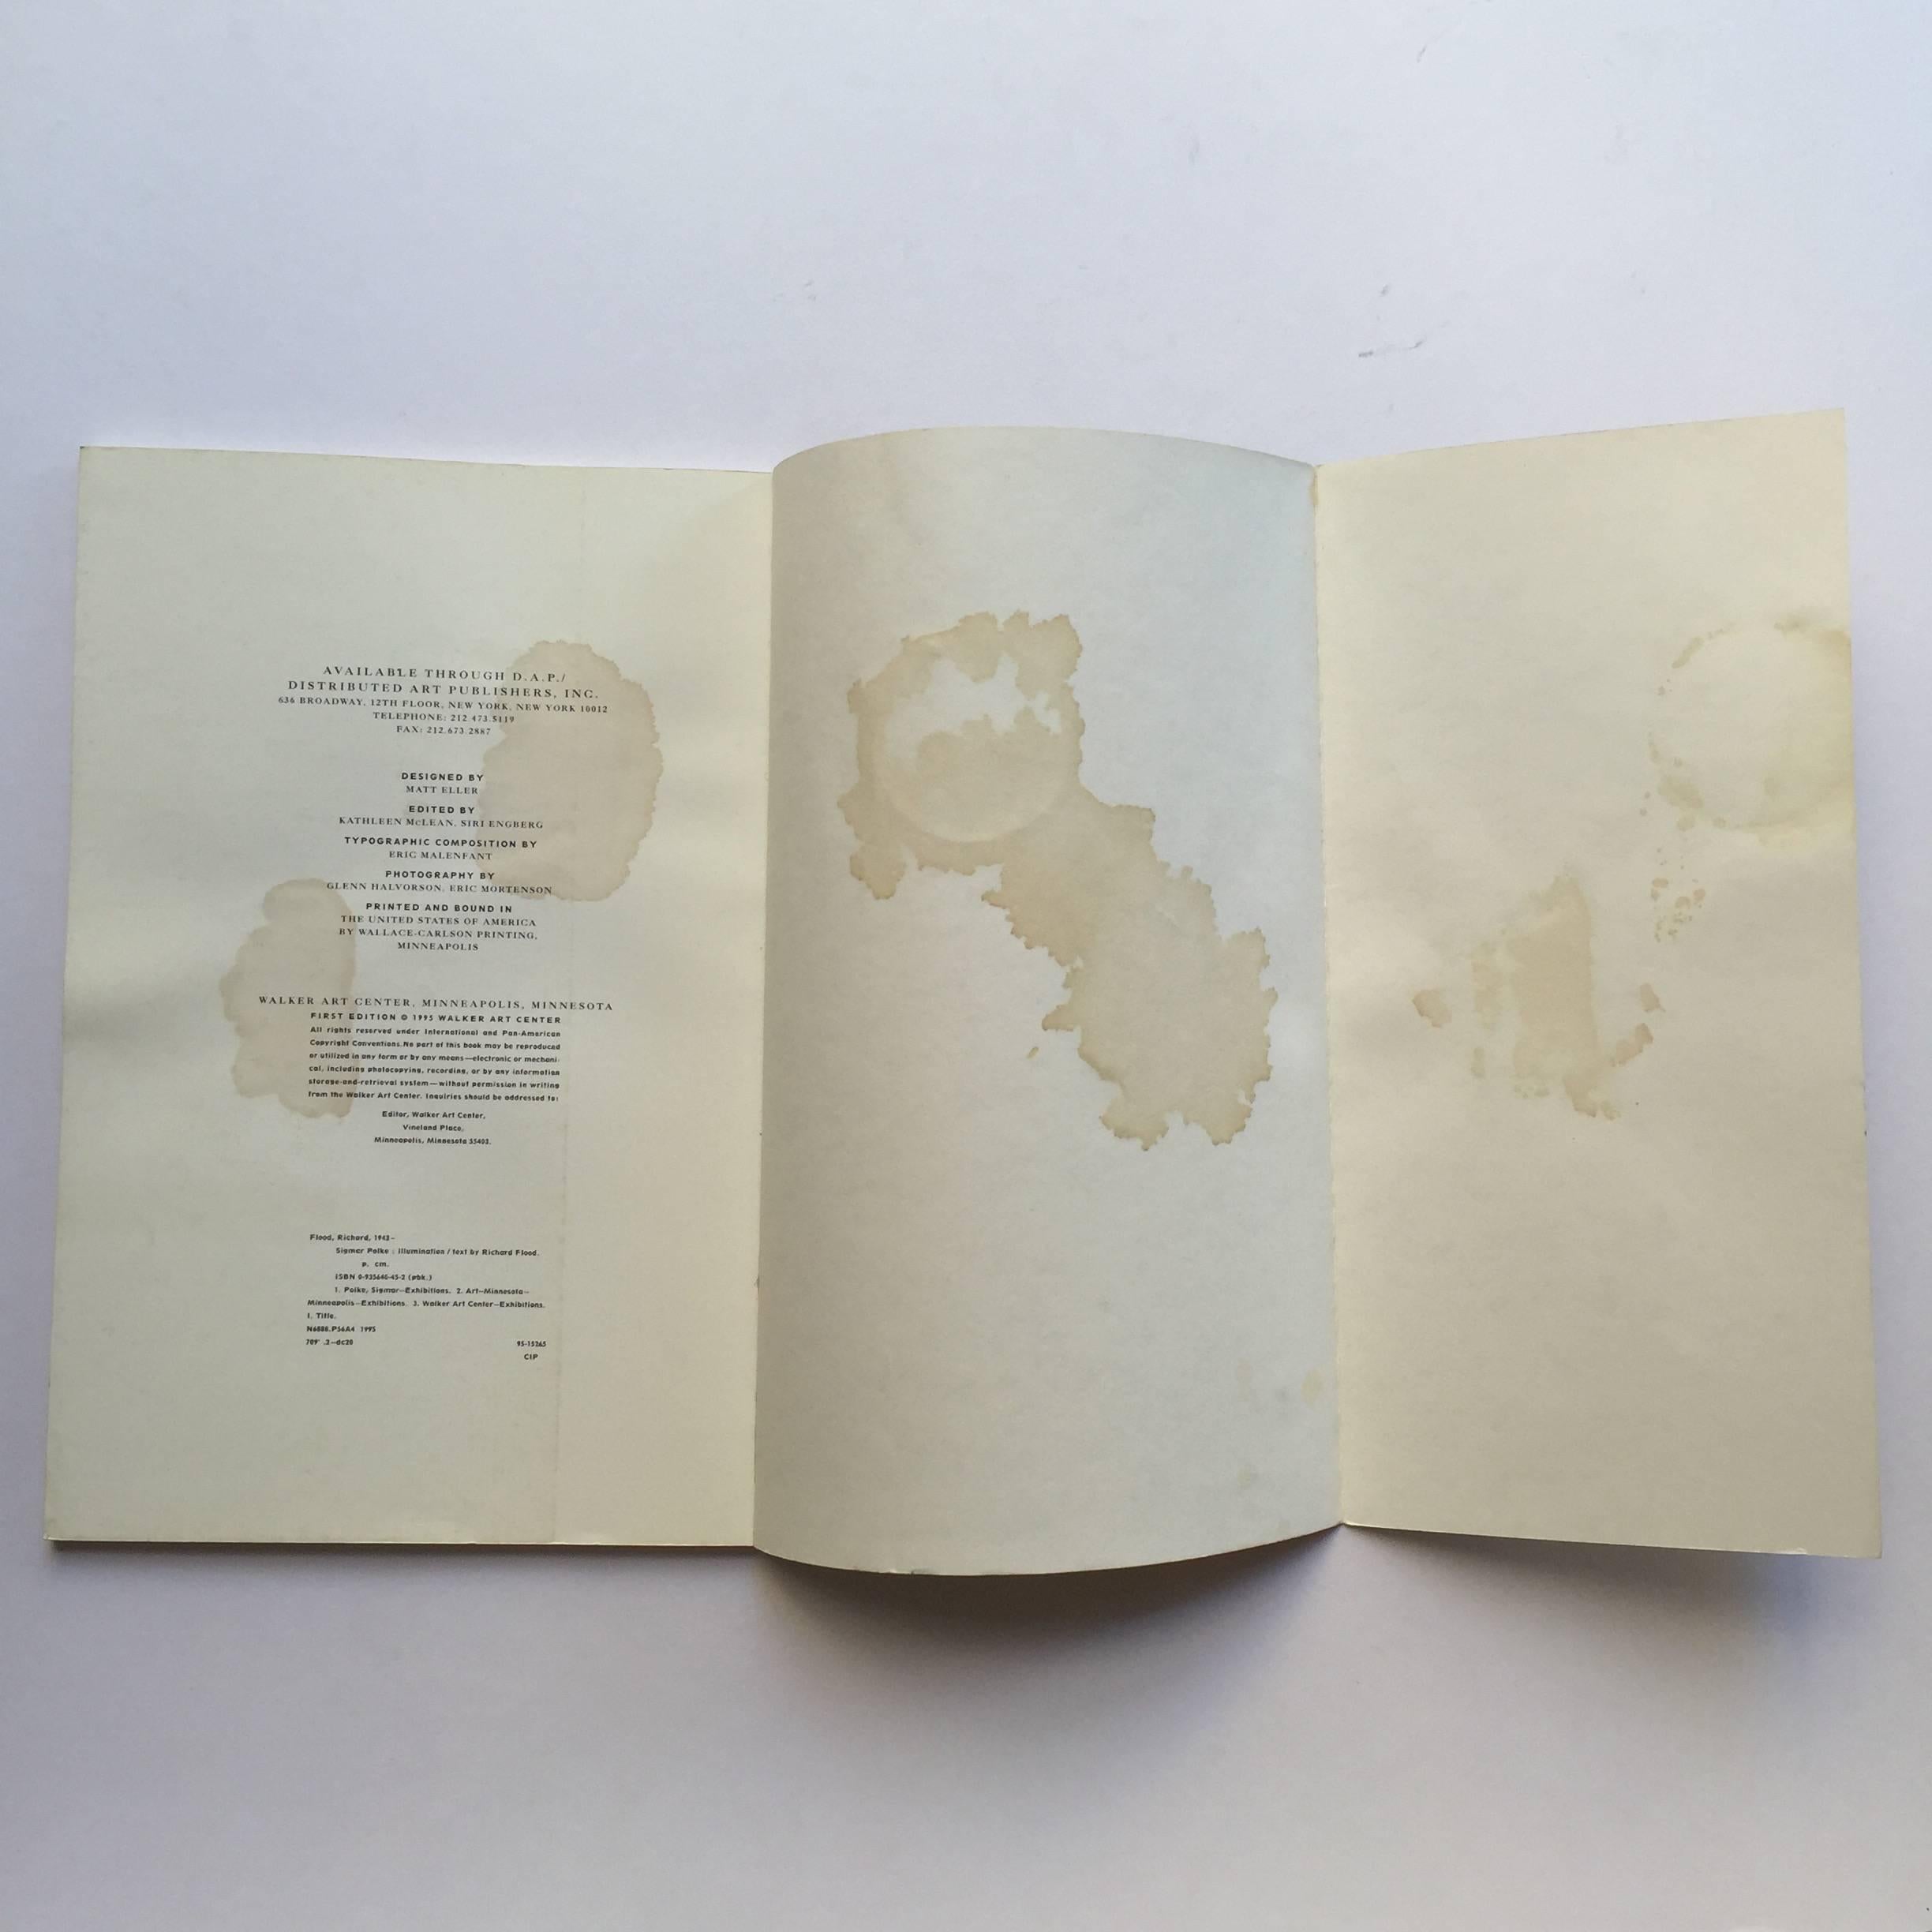 First edition, published by Walker Art Center, Minnesota, 1995

This scarce catalogue was produced for an exhibition of Polke’s works at the Walker Art Centre. Laid out in 8 chapters, we are introduced to a separate body of works, with quotes,